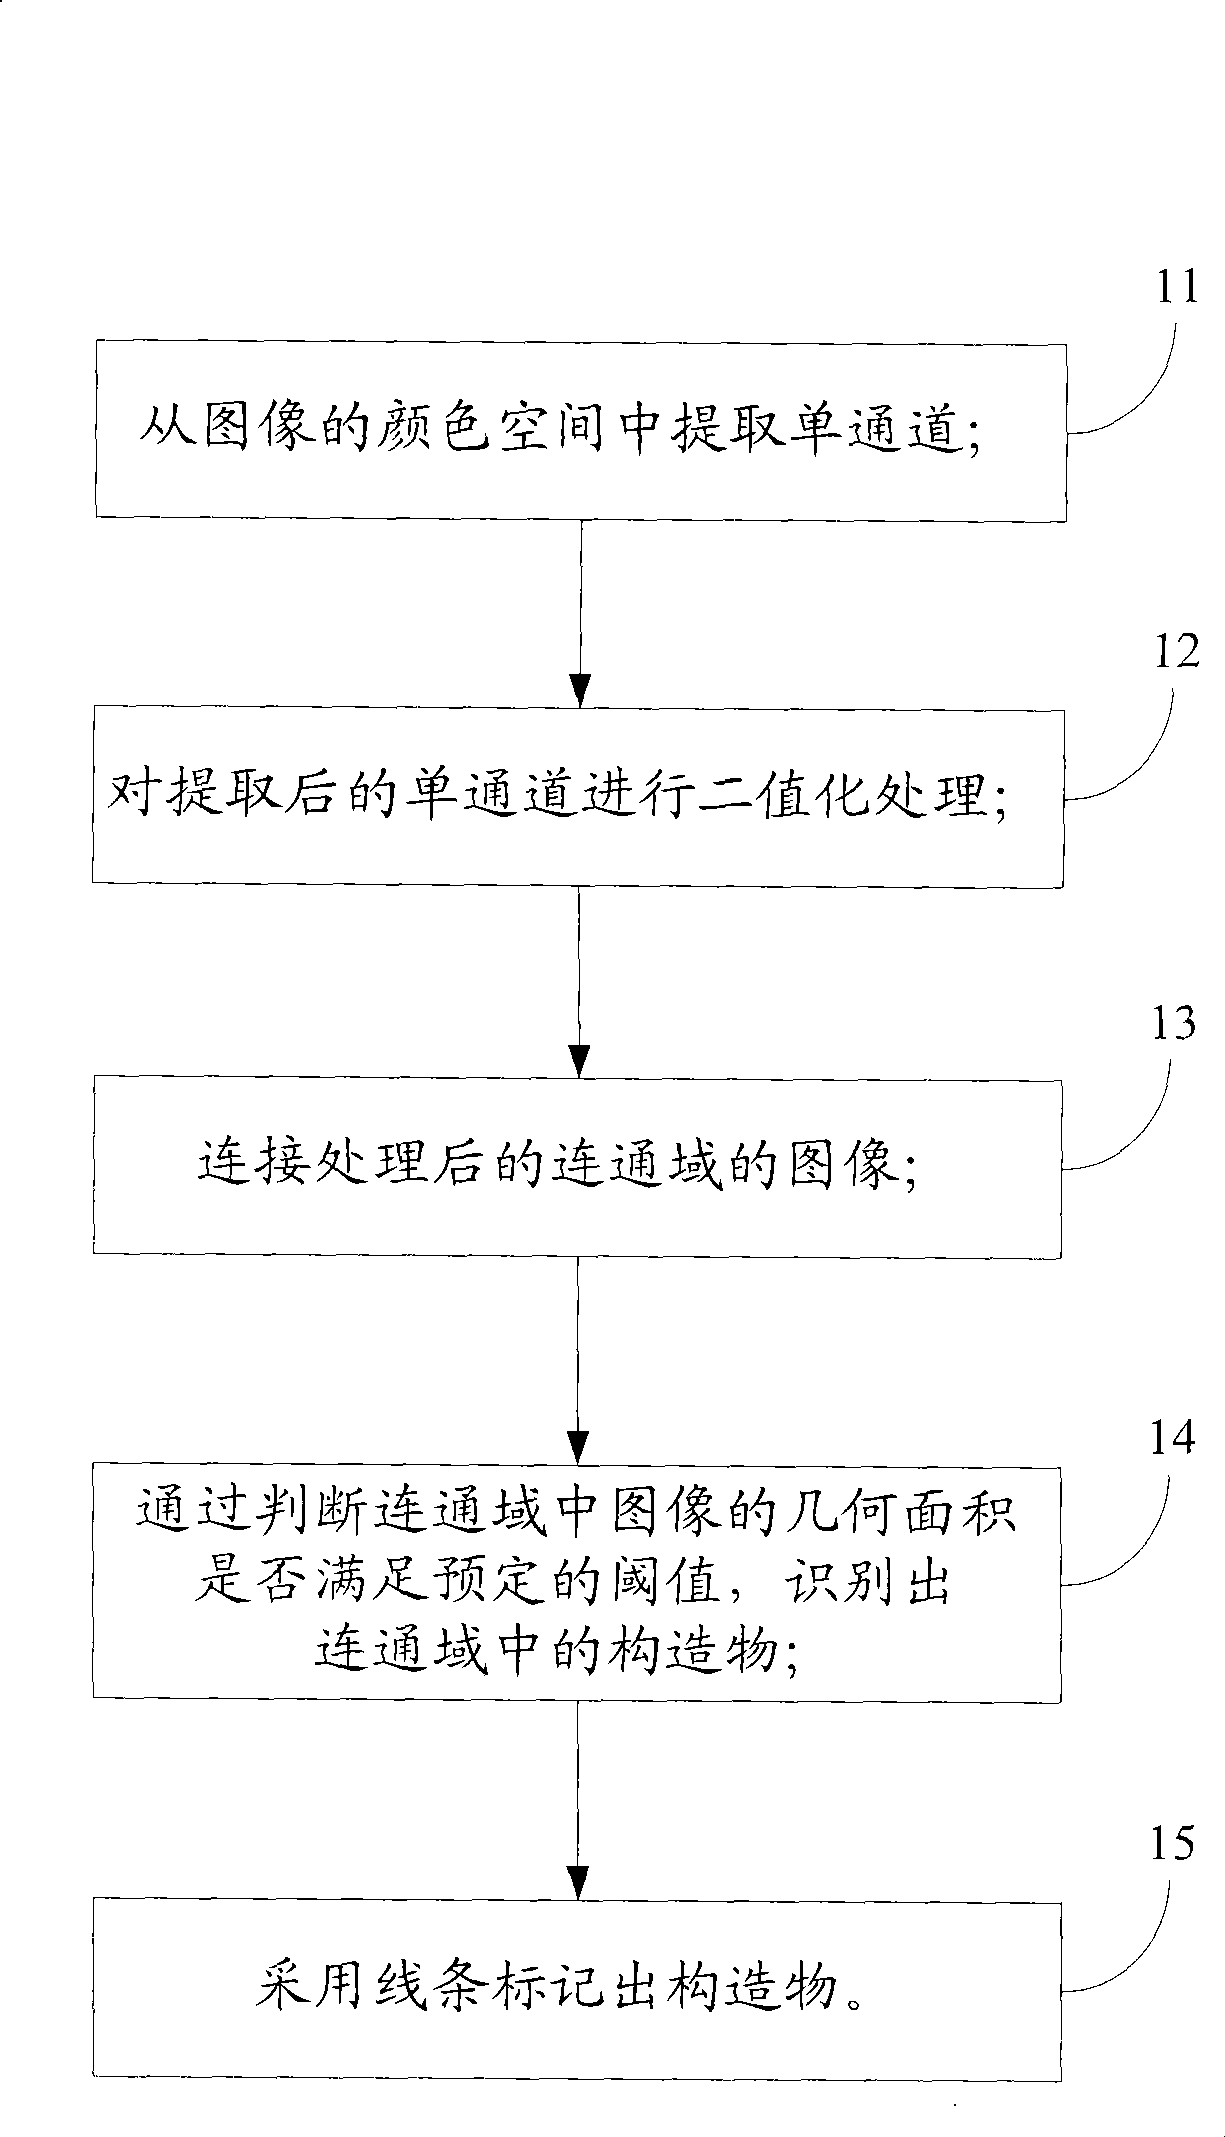 Method for automatically indentifying structures in front of roads